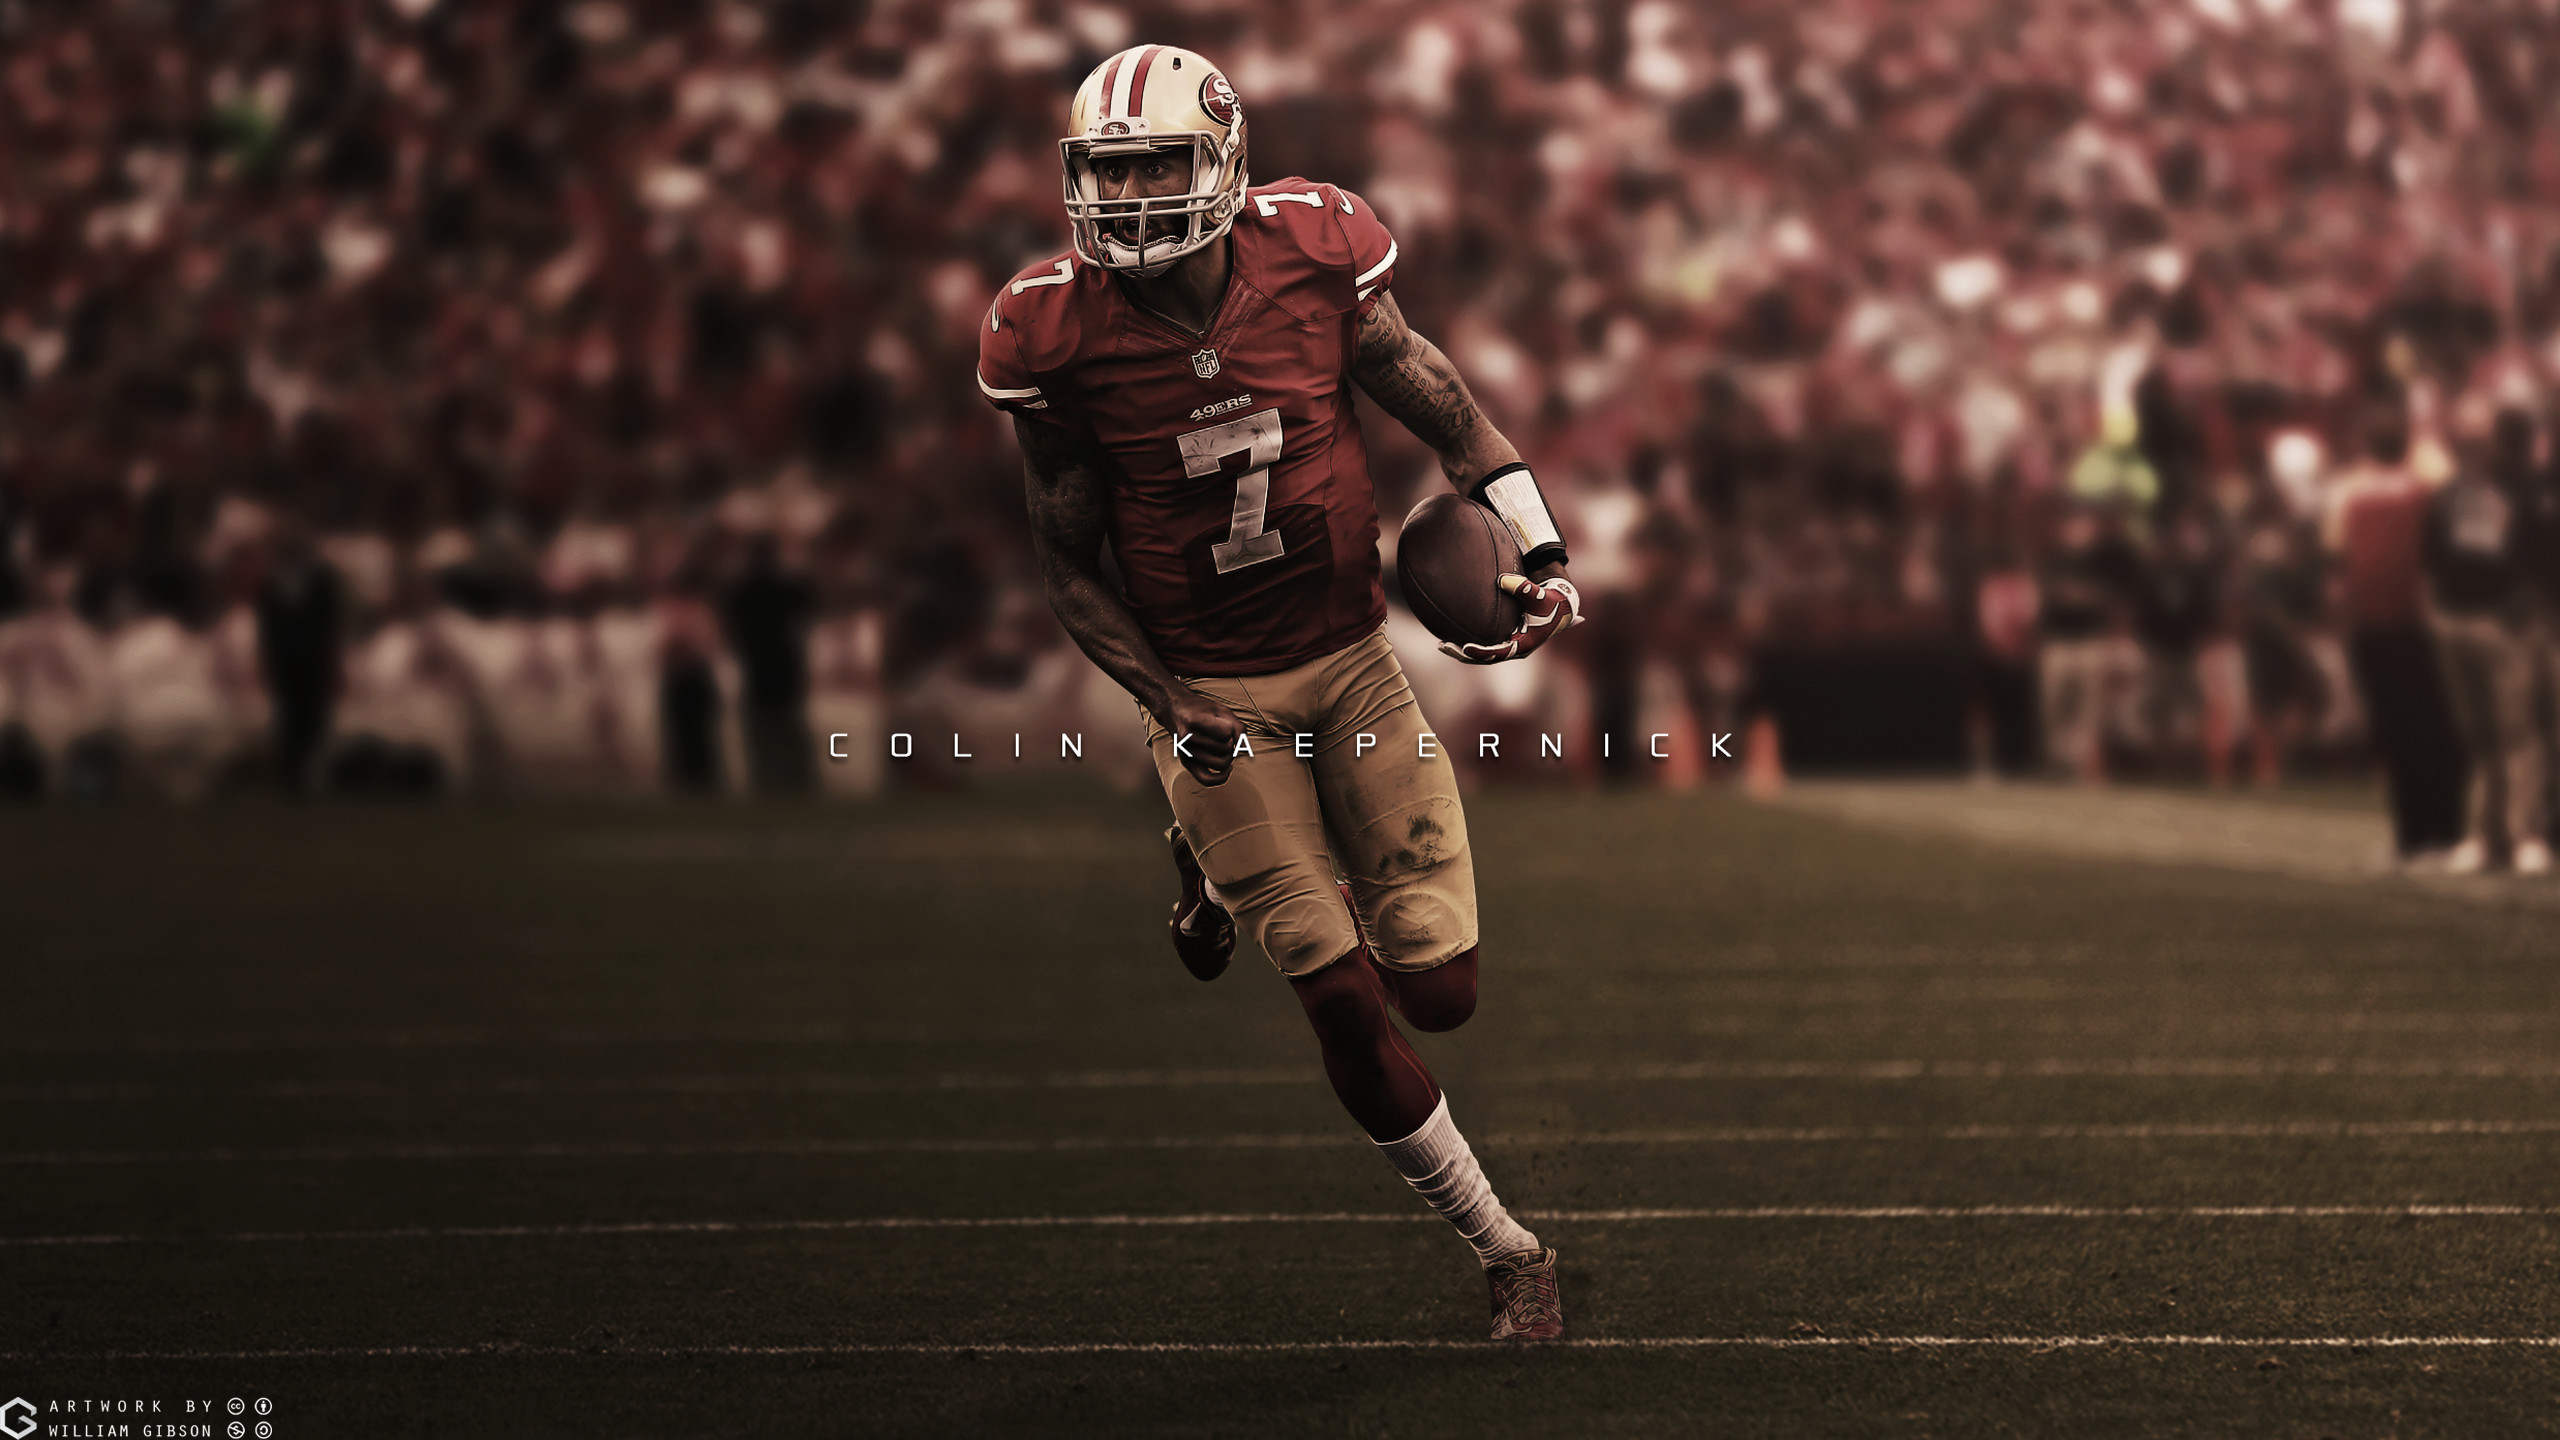 2560x1440 Colin Kaepernick Wallpaper by GibsonGraphics Colin Kaepernick Wallpaper by  GibsonGraphics